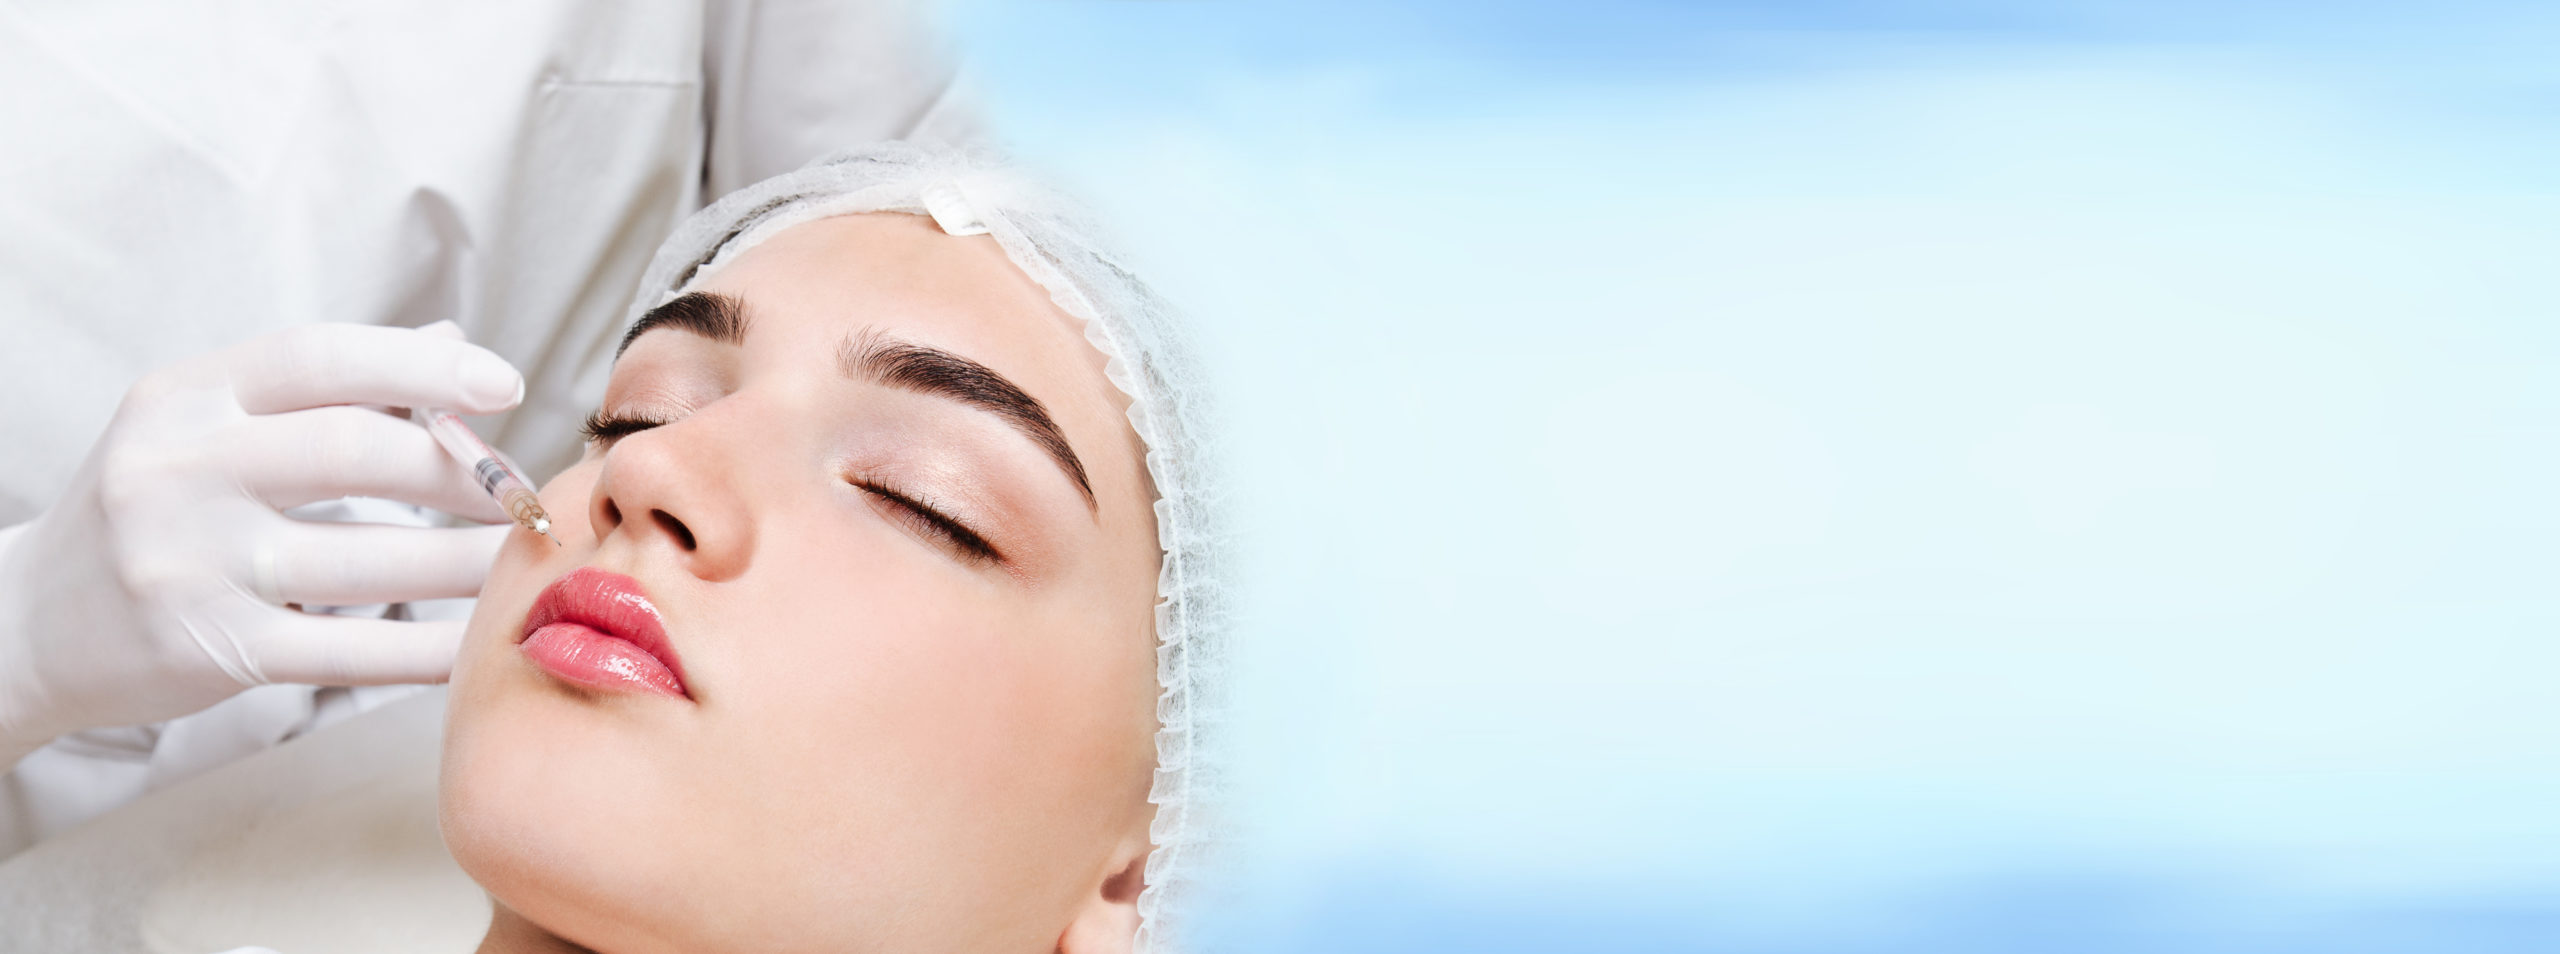 Botox Injections Treatment, Recovery & Side Effects